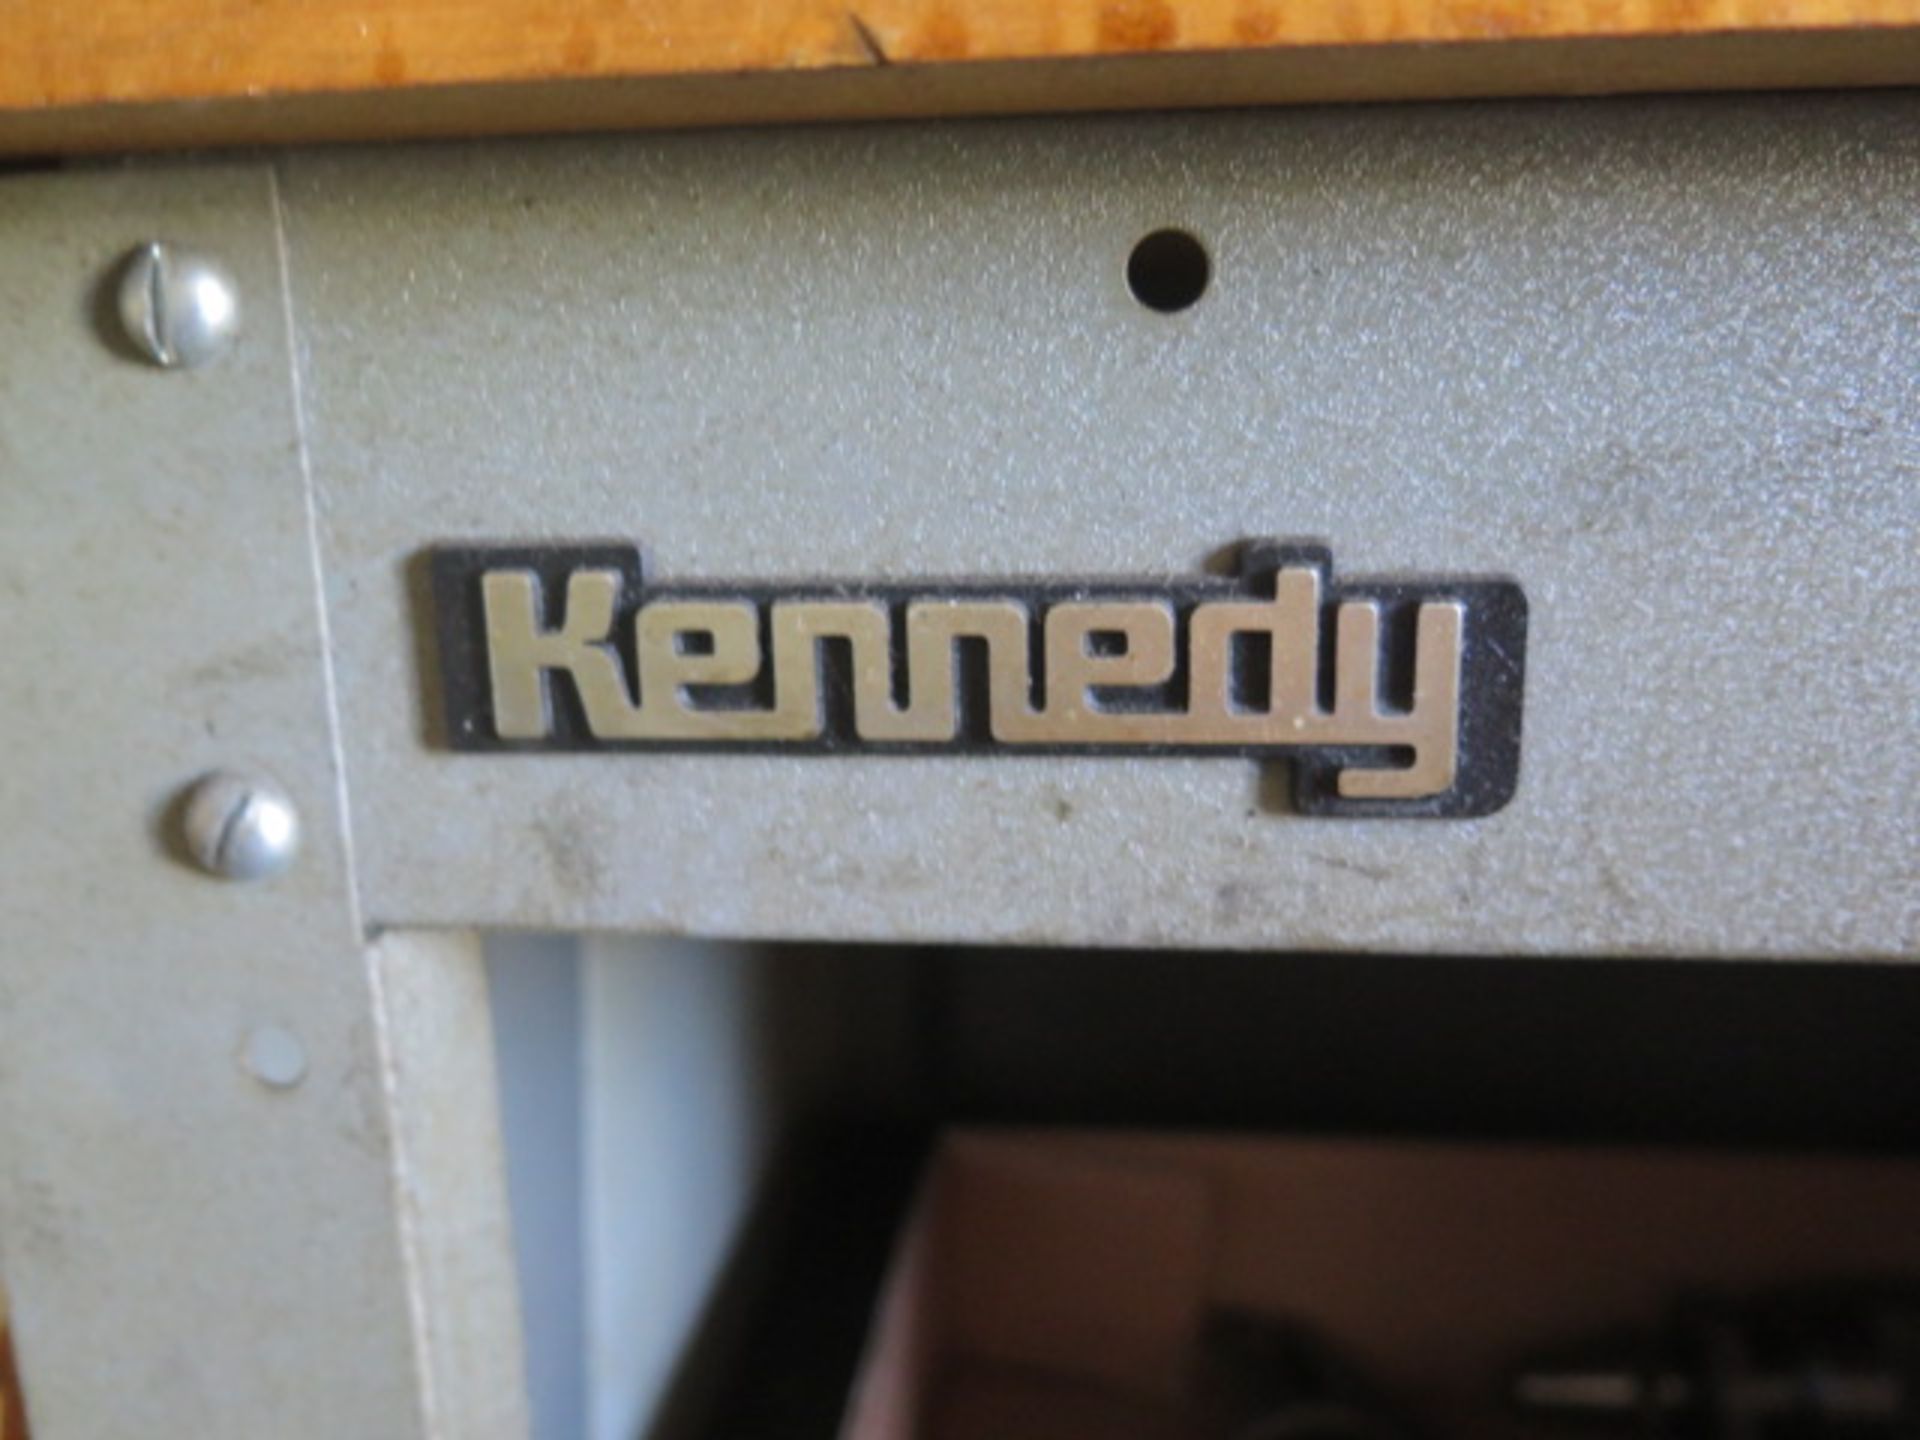 Kennedy Maple-Top Work Bench (SOLD AS-IS - NO WARRANTY) - Image 5 of 5